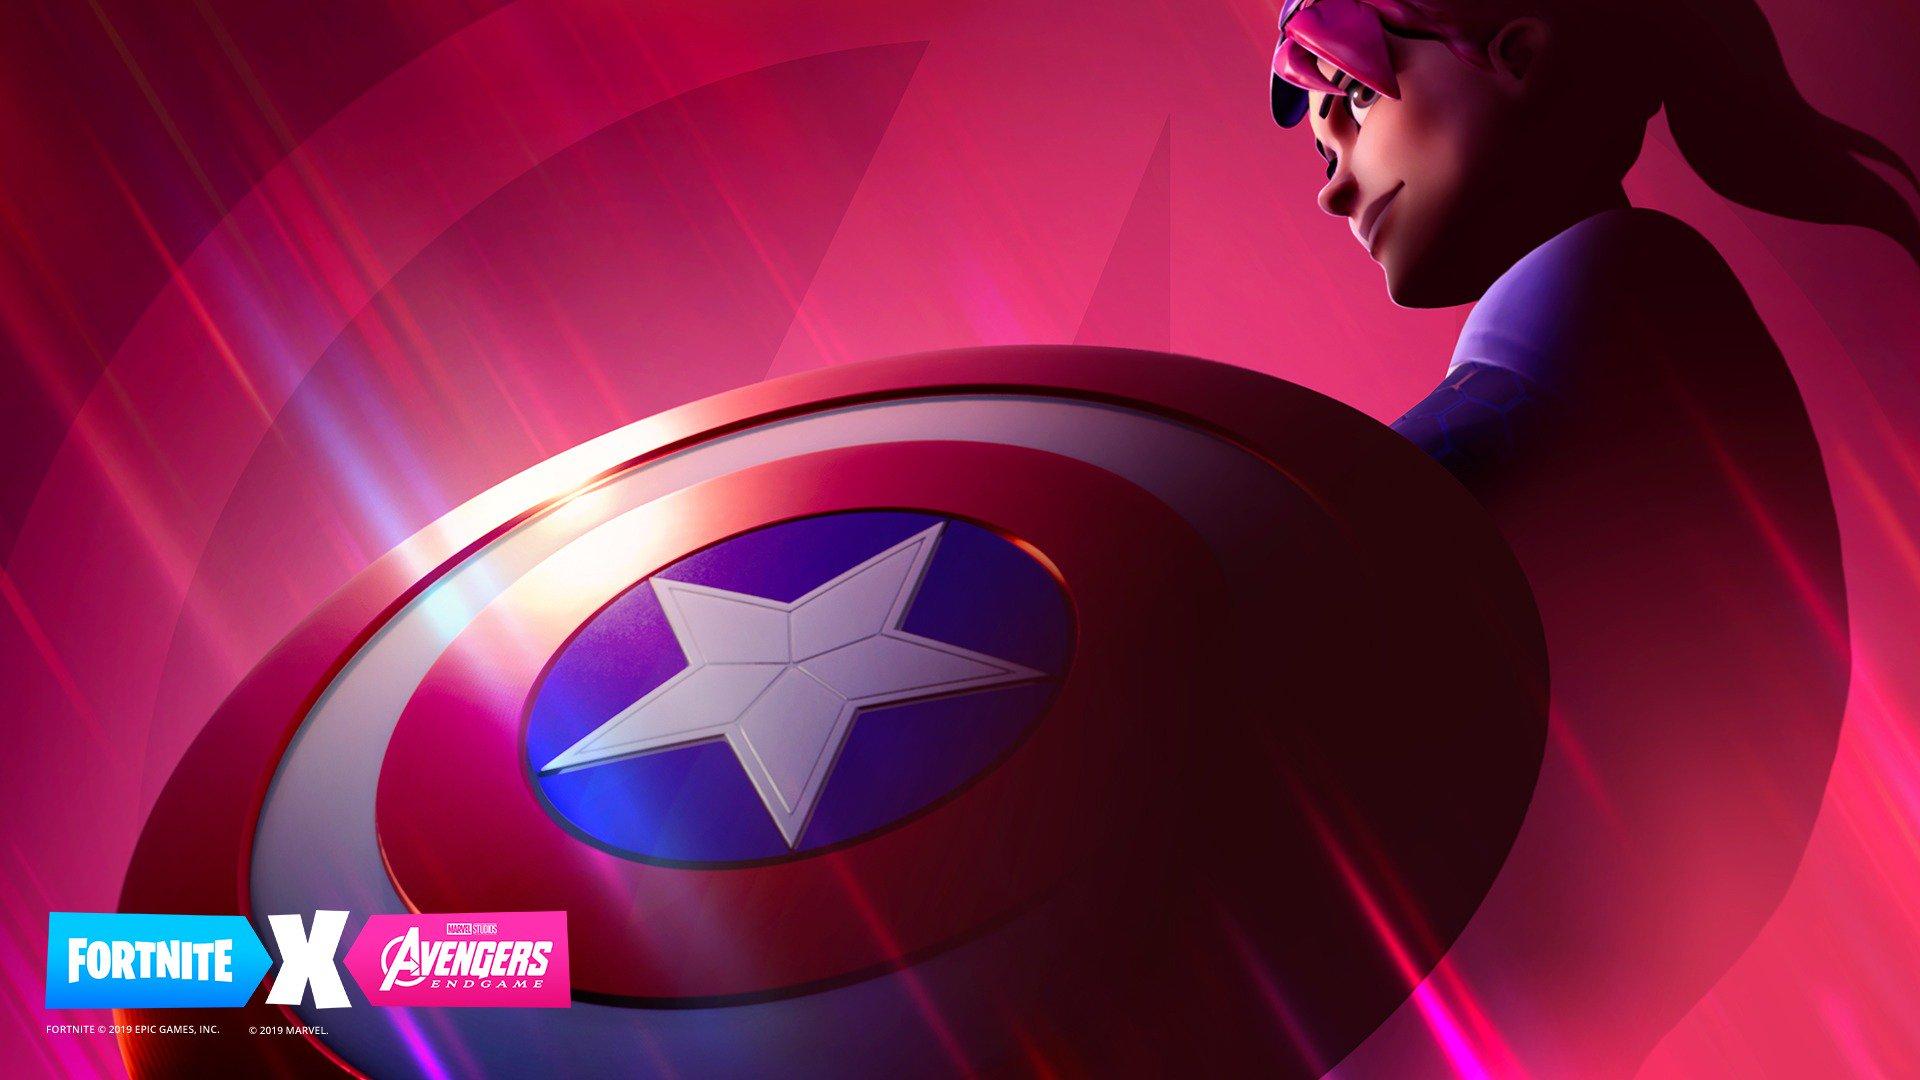 fortnite and avengers launch mysterious crossover to celebrate endgame - fortnite radio